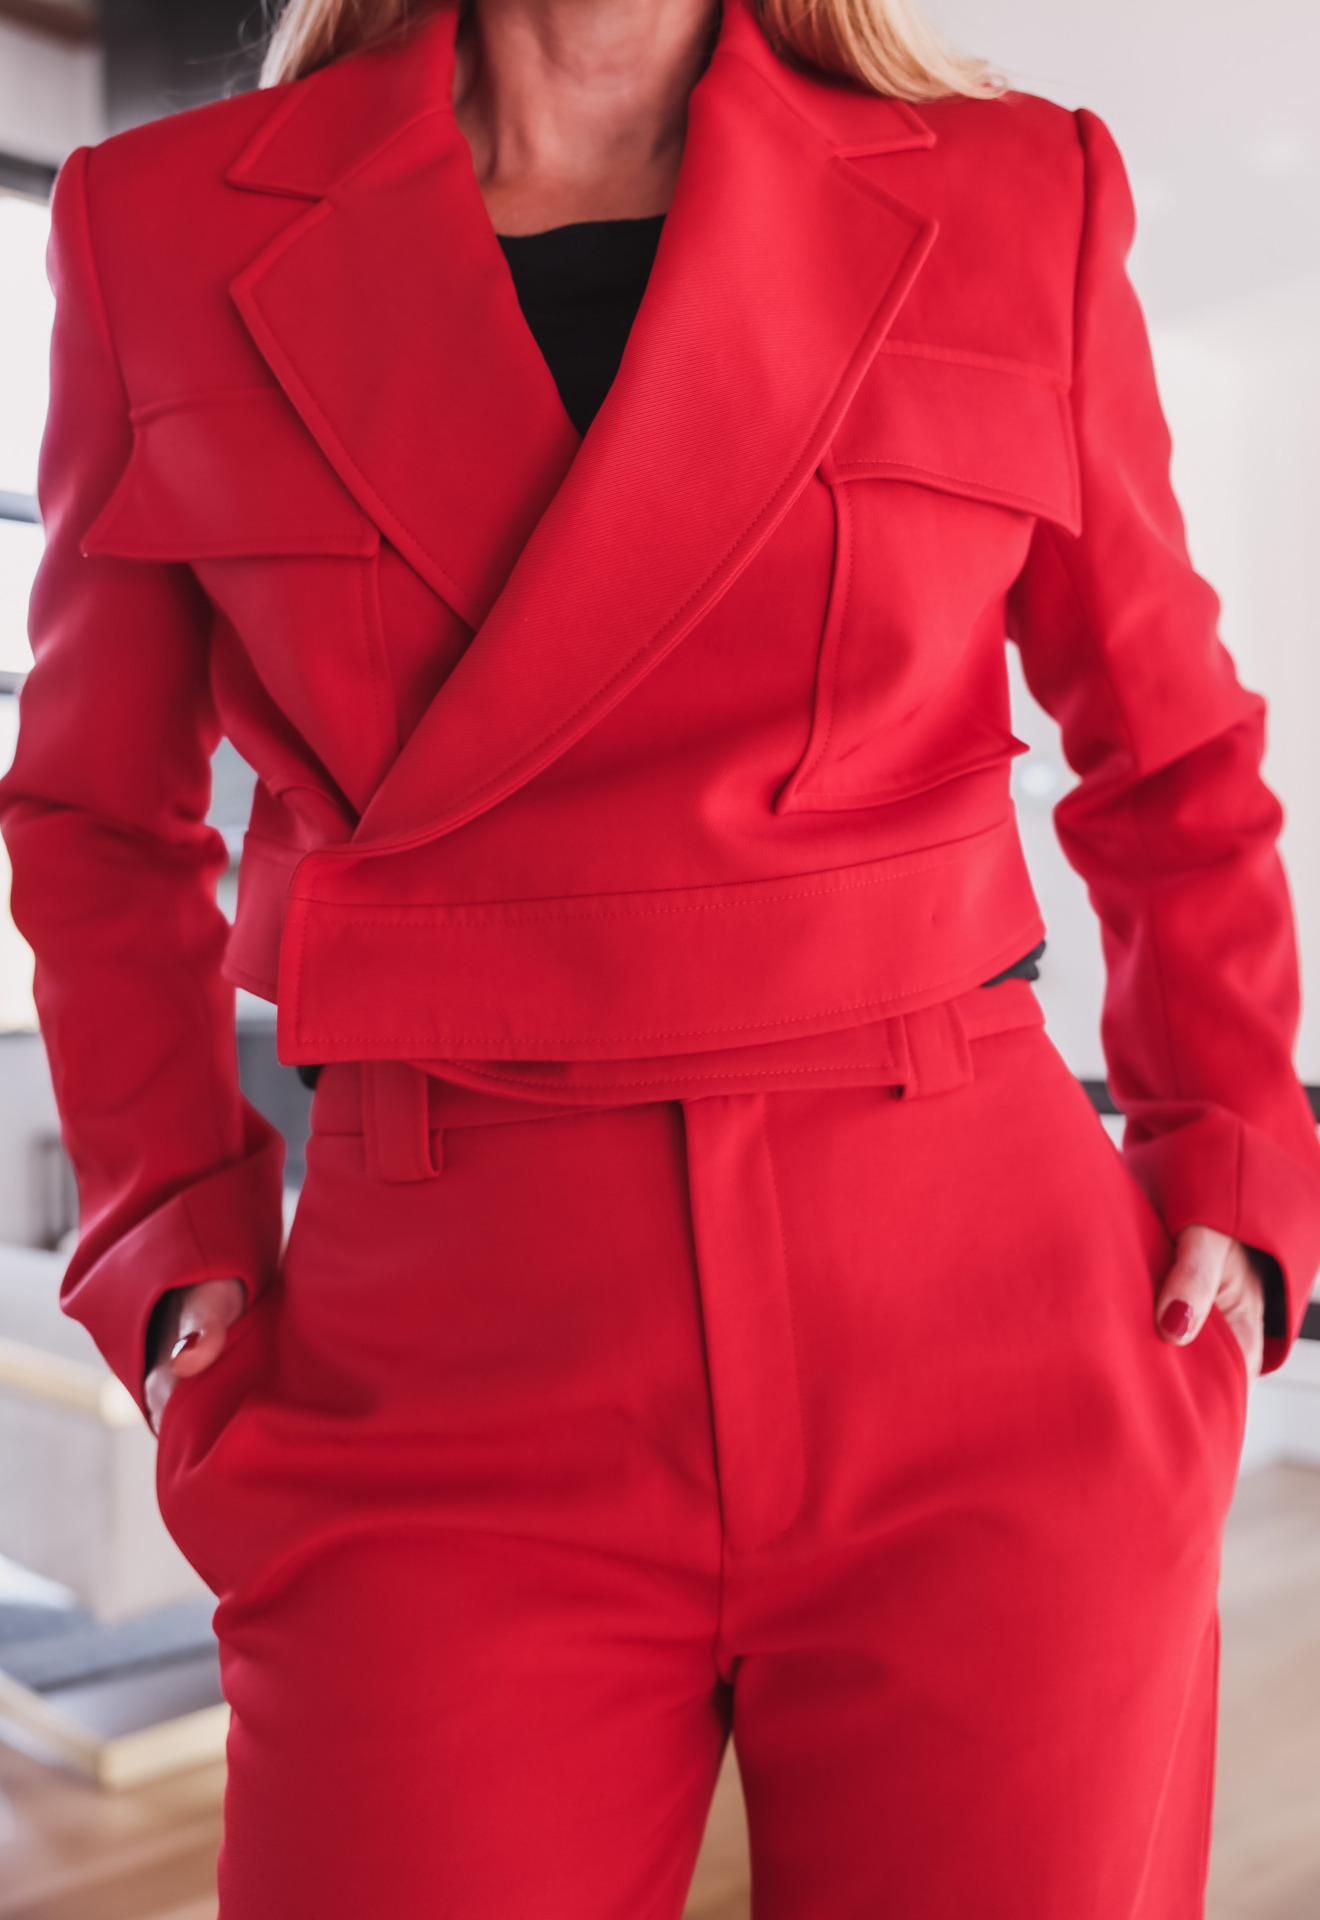 A.L.C. Red Jacket